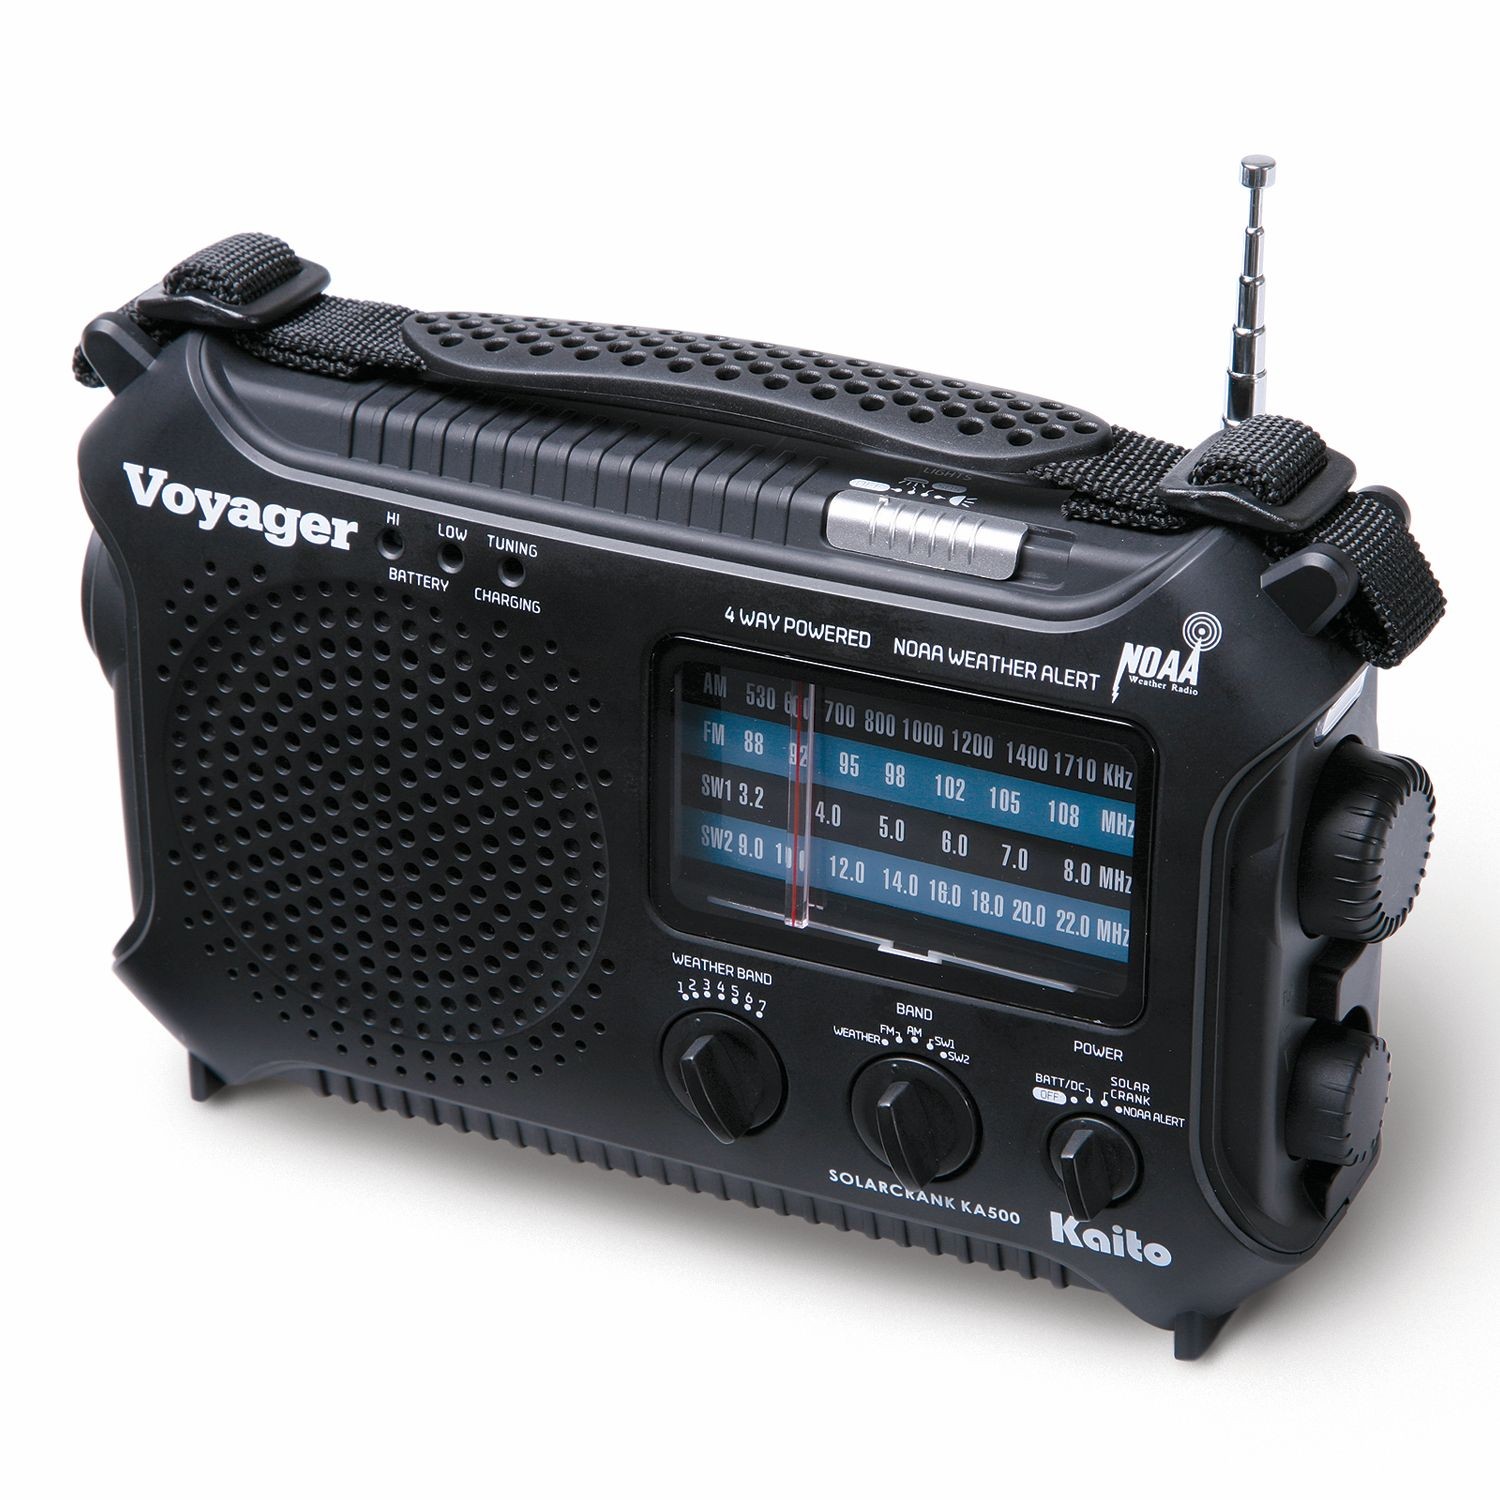 4-Way Powered Emergency Weather Alert Radio With Cell Phone Charger - Black  | 17 Reviews  Stars | Signals | HG9642